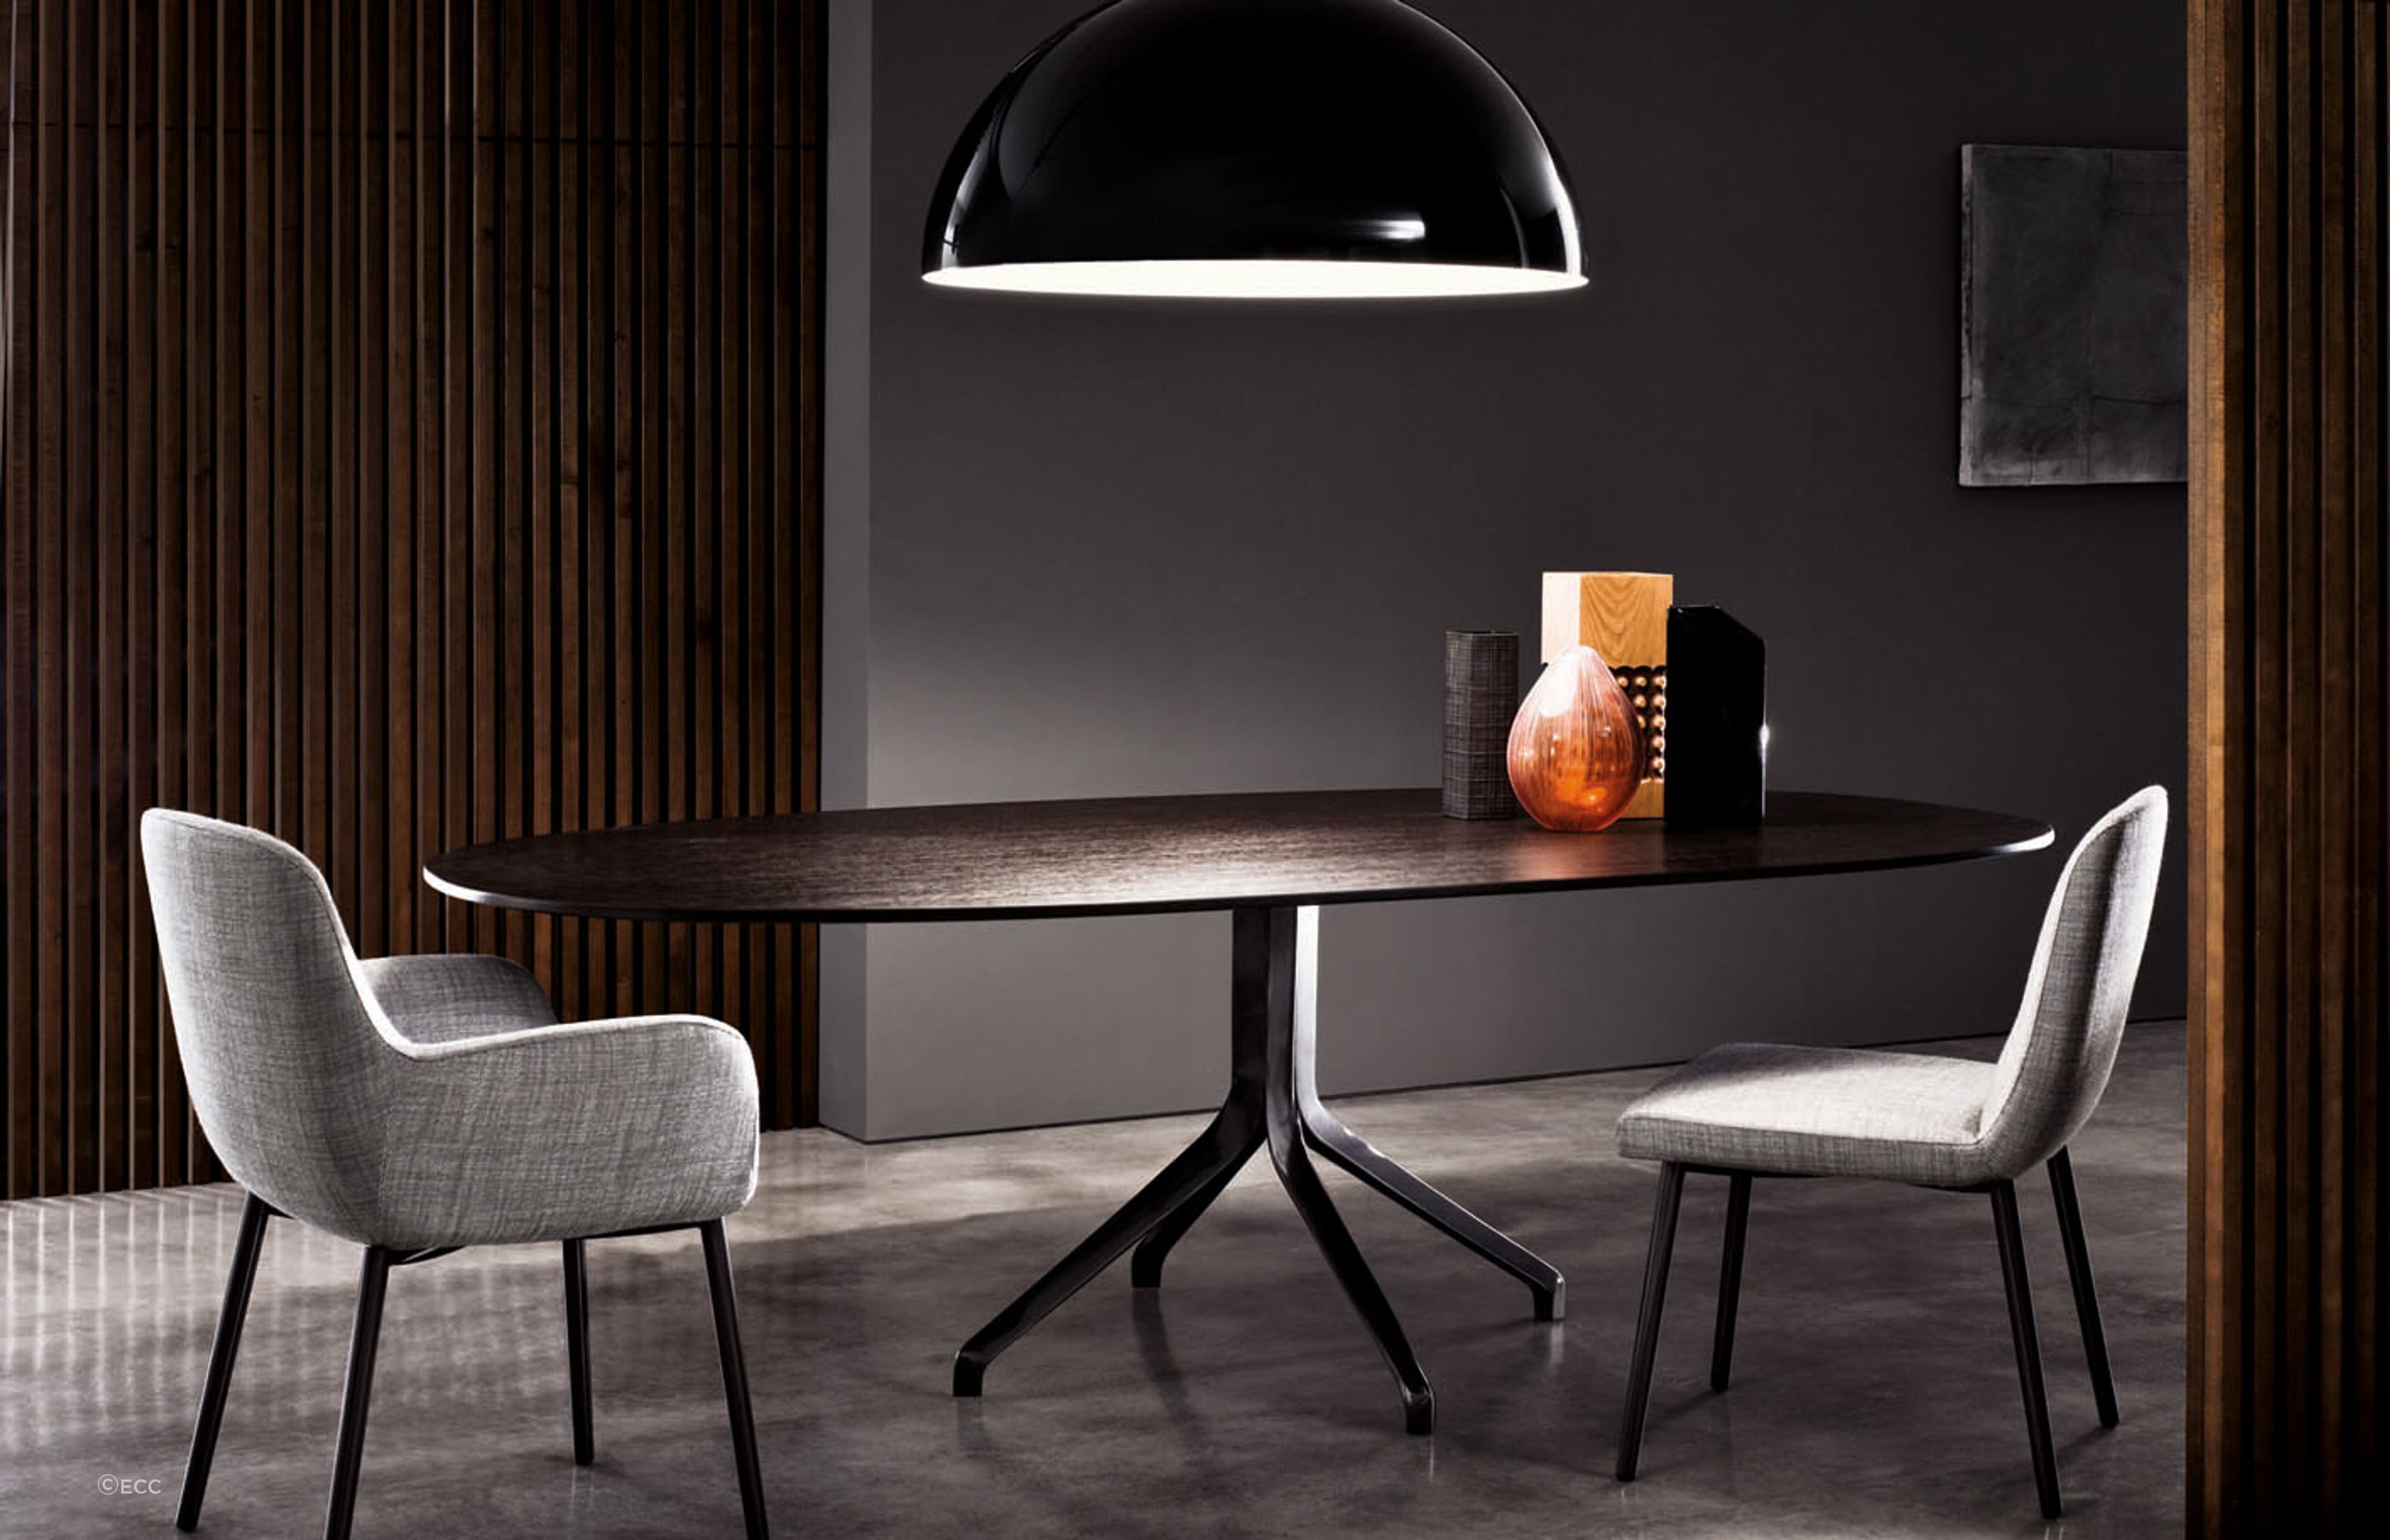 Perfectly positioned above the dining table with the Sonora Pendant by Oluce